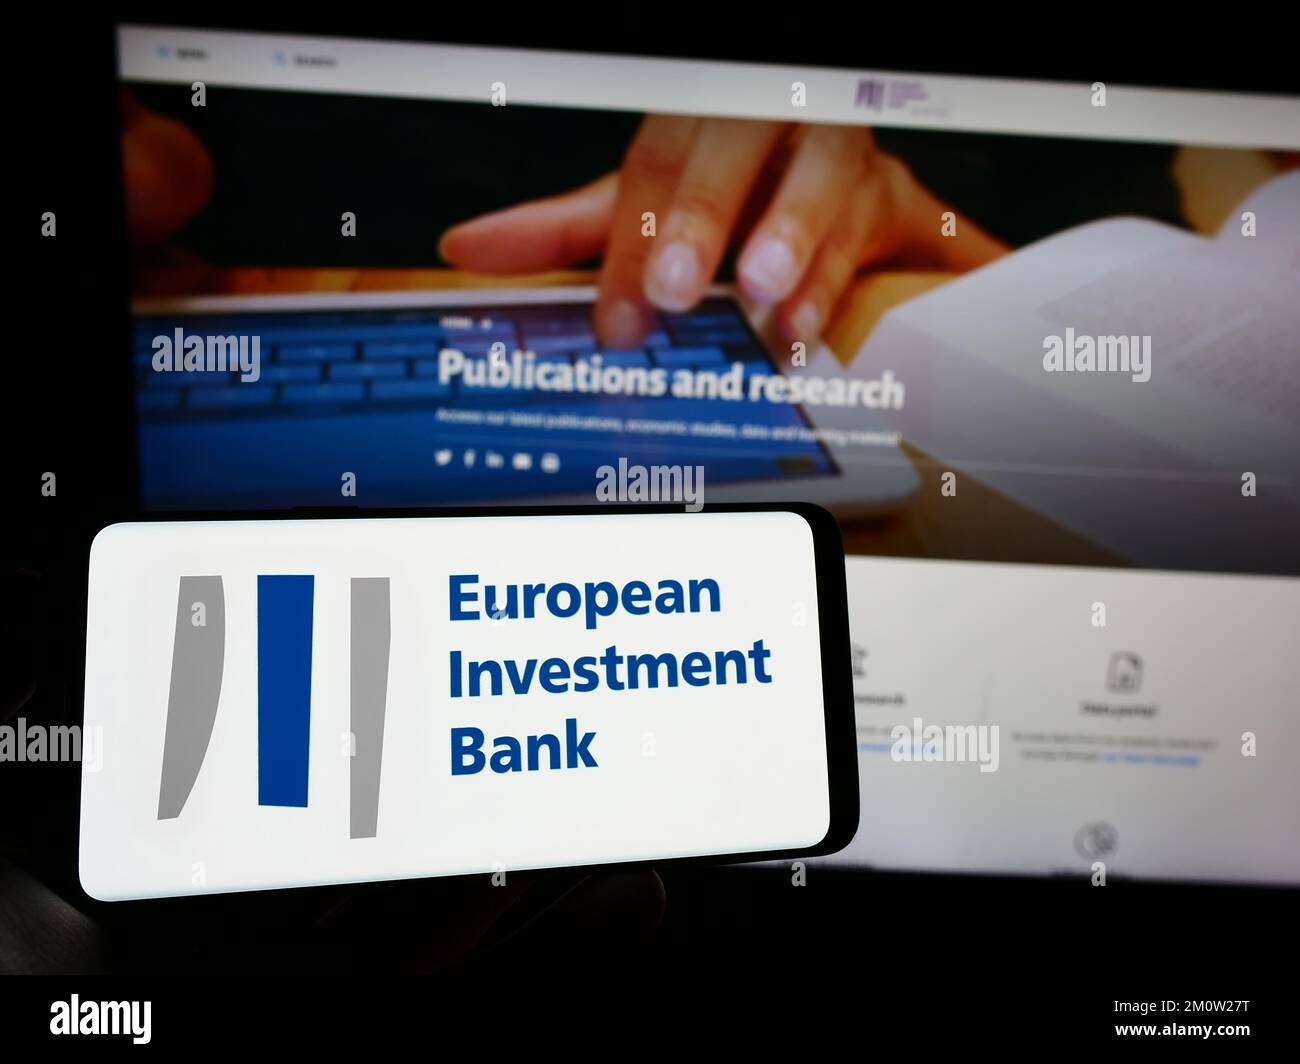 Person holding cellphone with logo of EU institution European Investment Bank (EIB) on screen in front of webpage. Focus on phone display. Stock Photo